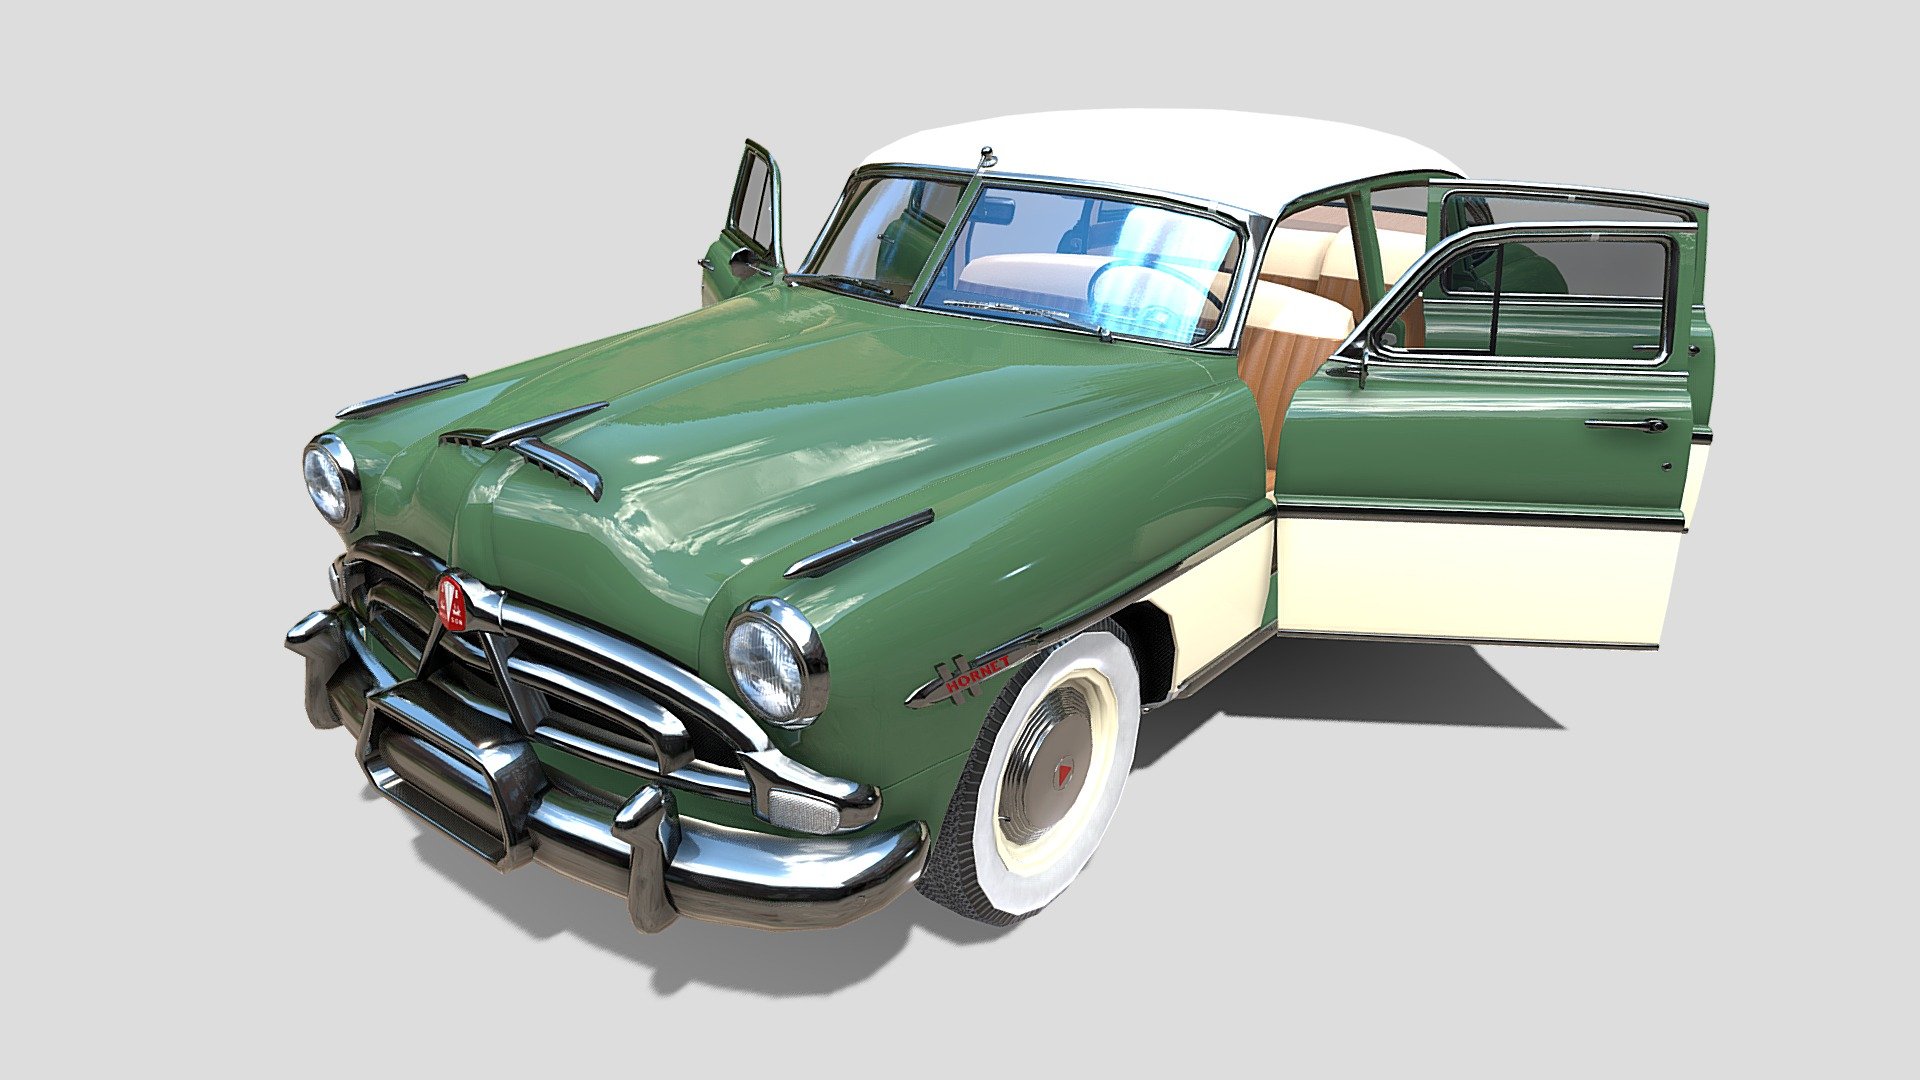 4 Door Hudson Hornet with detailed interior 3d model, rendered with Cycles in Blender, using PBR textures, as per seen on attached images. 
The 3d model is scaled to original size in Blender.

File formats:
-.blend, rendered with cycles, as seen in the images;
-.blend, with doors open, rendered with cycles, as seen in the images;
-.obj, with materials applied;
-.obj, with doors open, materials applied;
-.dae, with materials applied;
-.dae, with doors open, materials applied;
-.fbx, with materials applied;
-.fbx, with doors open, materials applied;
-.stl;
-.stl, with doors open,

3D Software:
The 3D model was originally created in Blender 3.1 and rendered with Cycles.

Materials and textures:
The models have materials applied in all formats, and are ready to import and render.
Materials are image based using PBR, the model comes with three materials, with five 4k PBR png image textures each corresponding to:
-exterior;
-interior;
-wheels; - 4 Door Hudson Hornet with interior v2 - Buy Royalty Free 3D model by dragosburian 3d model